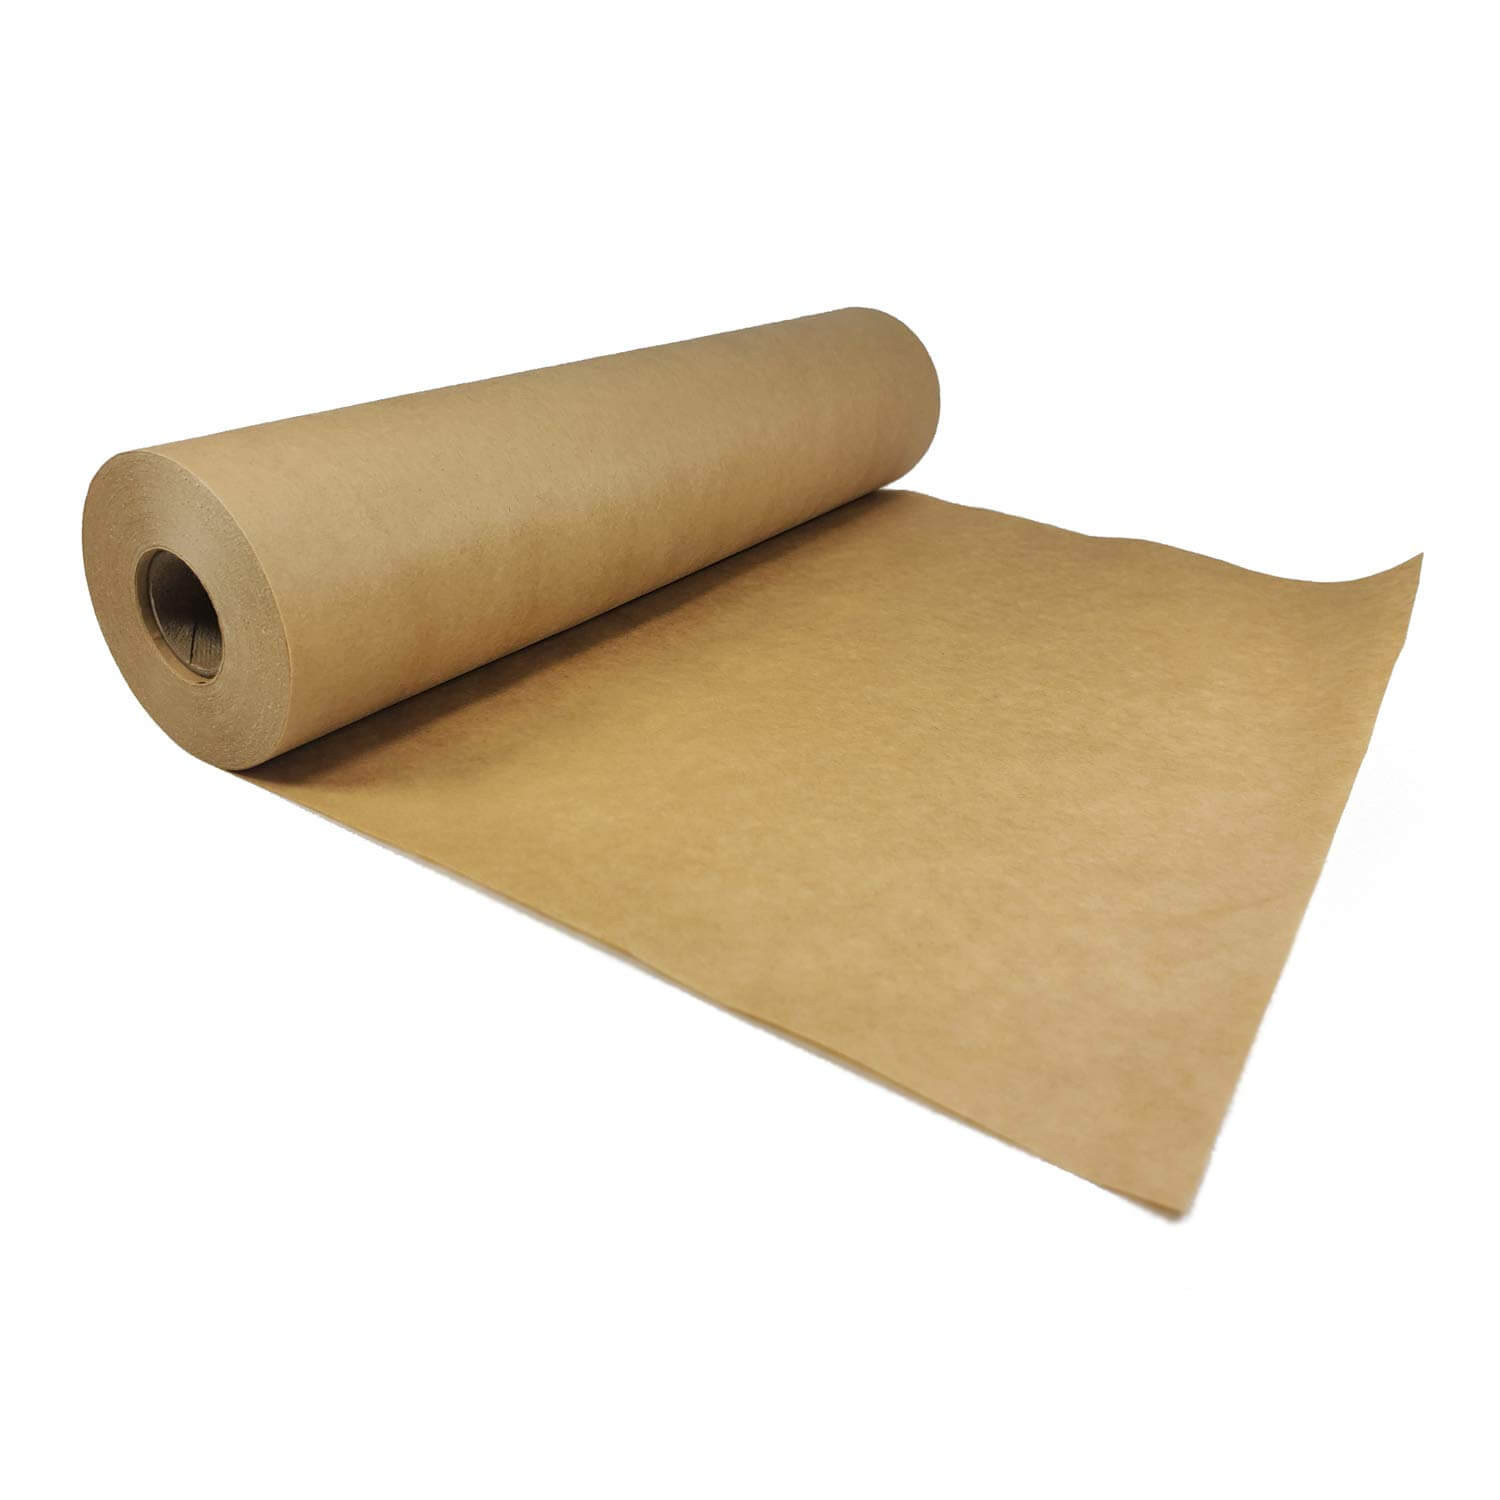 Set of 12 x 60 Yards Brown Masking Paper Roll and 1 1/2 x 60